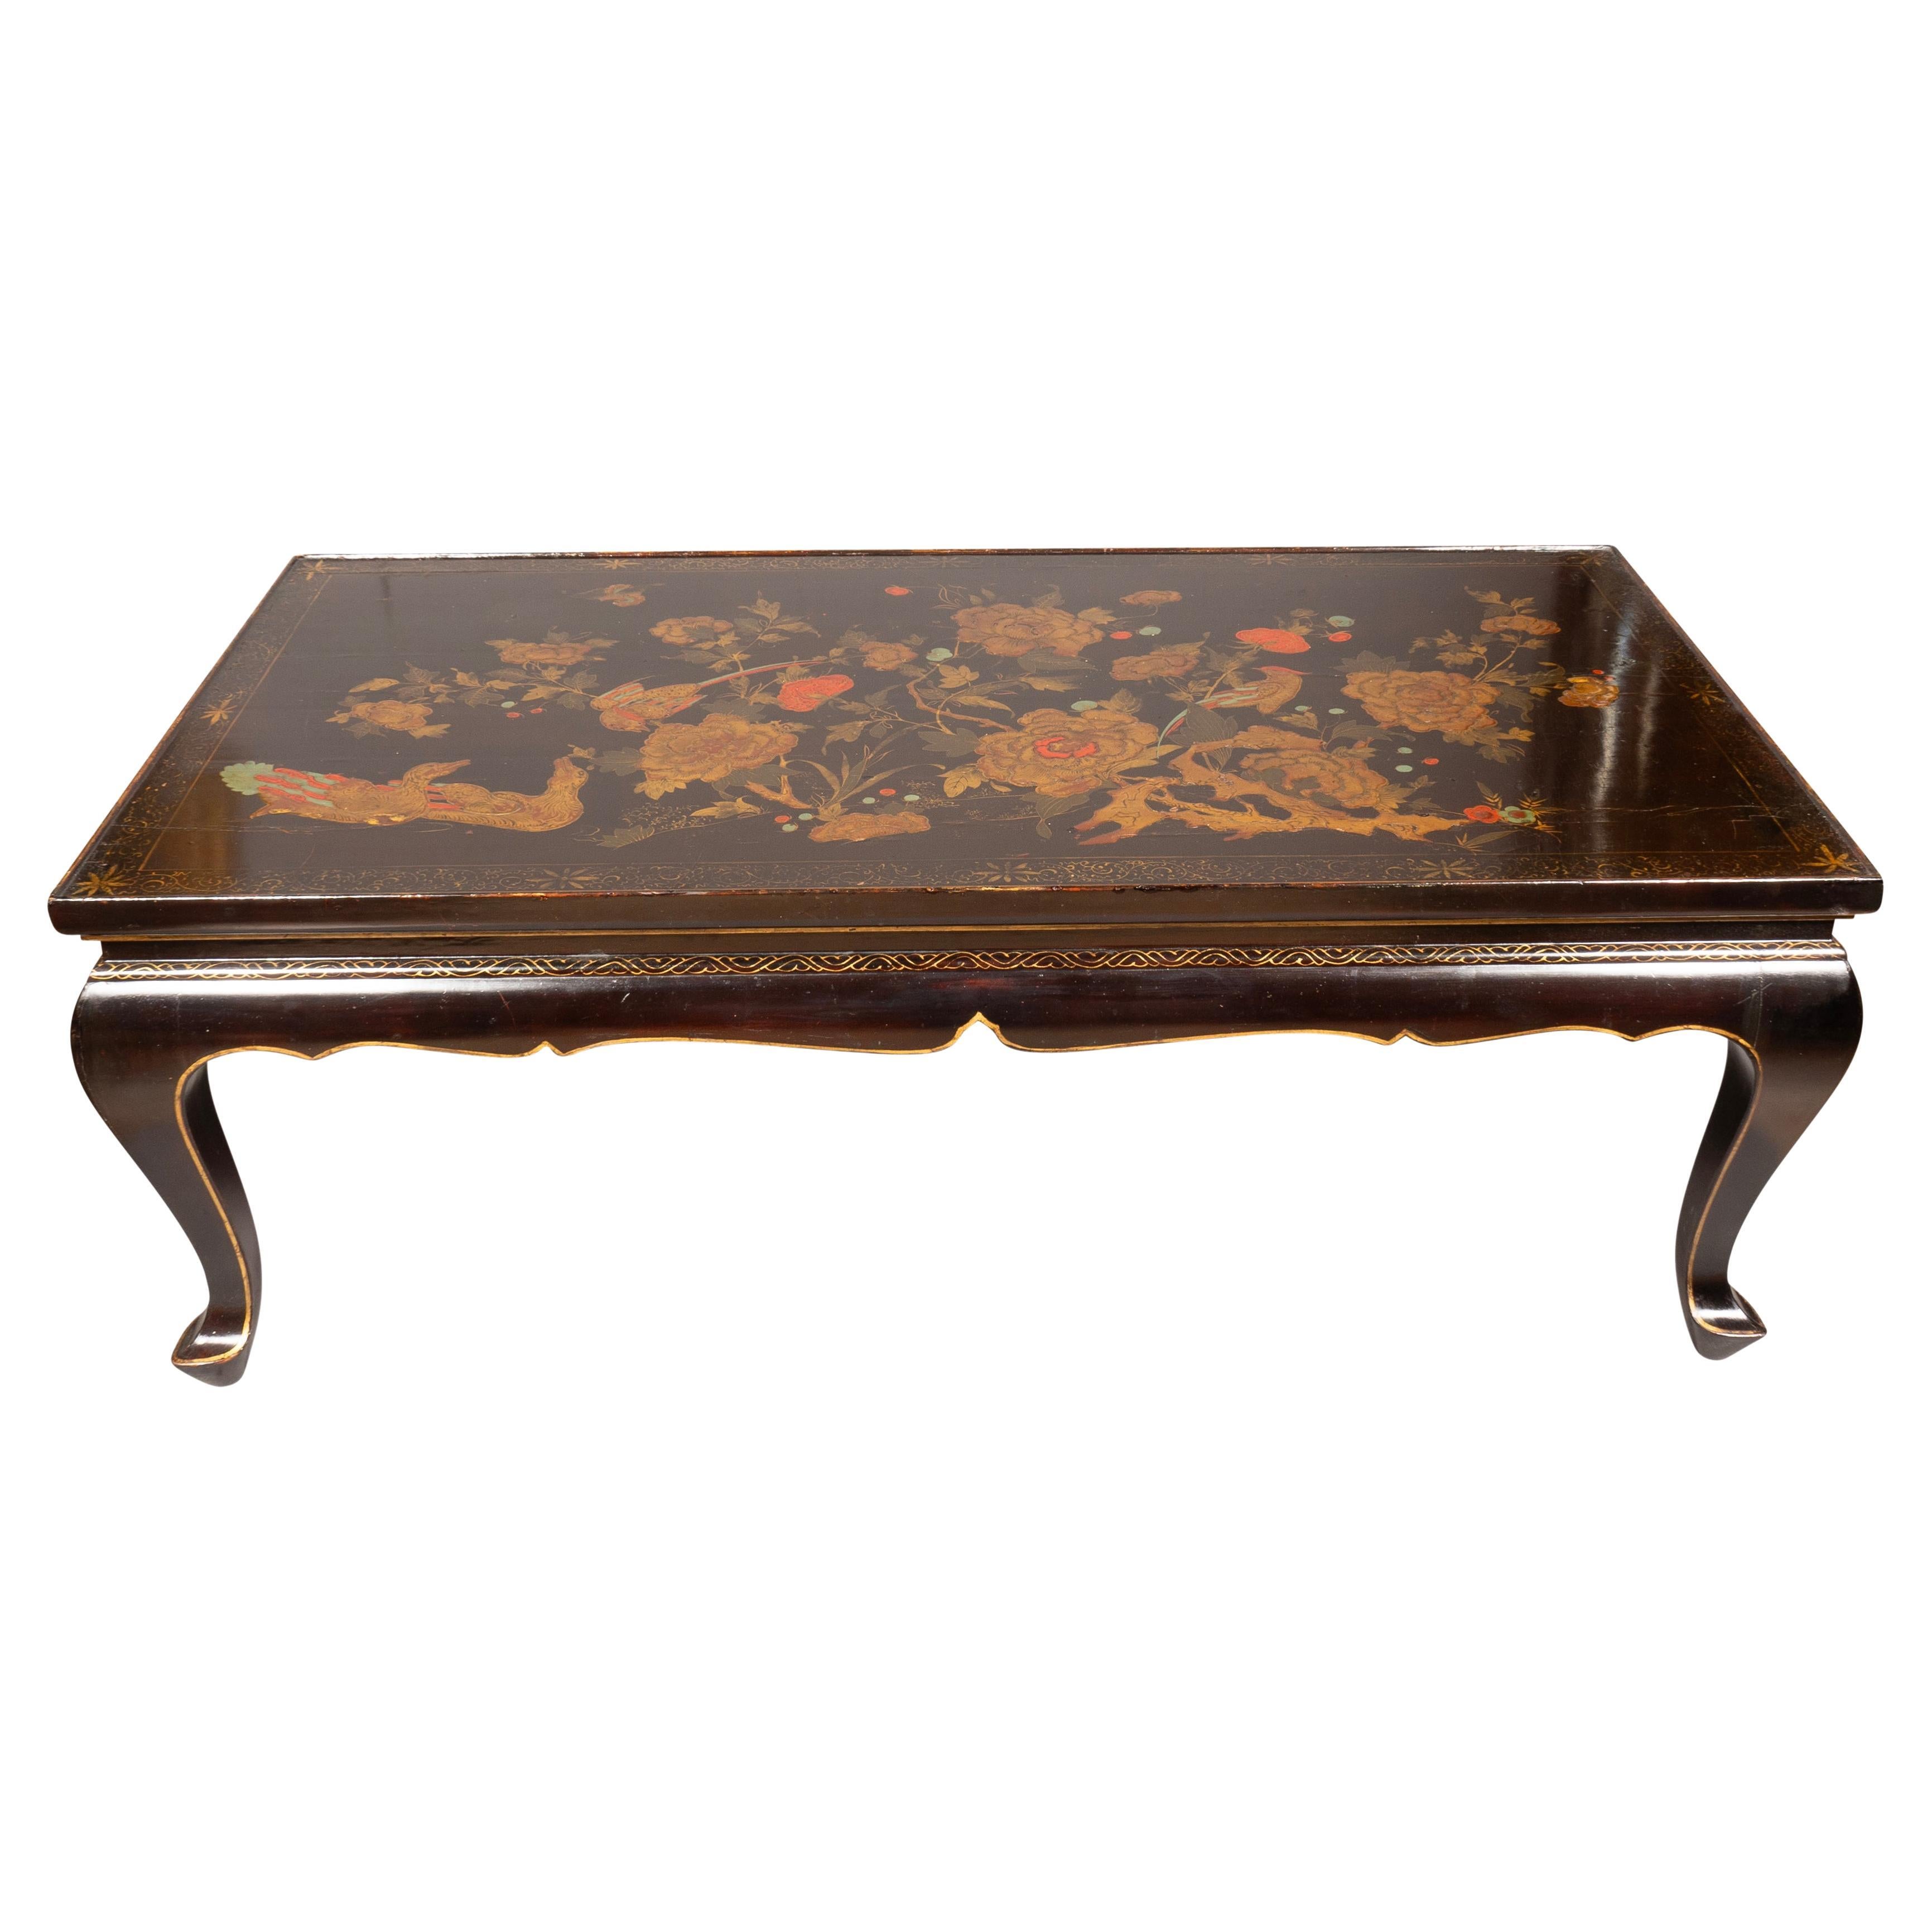 Chinese Black Lacquer And Chinoiserie Decorated Coffee Table